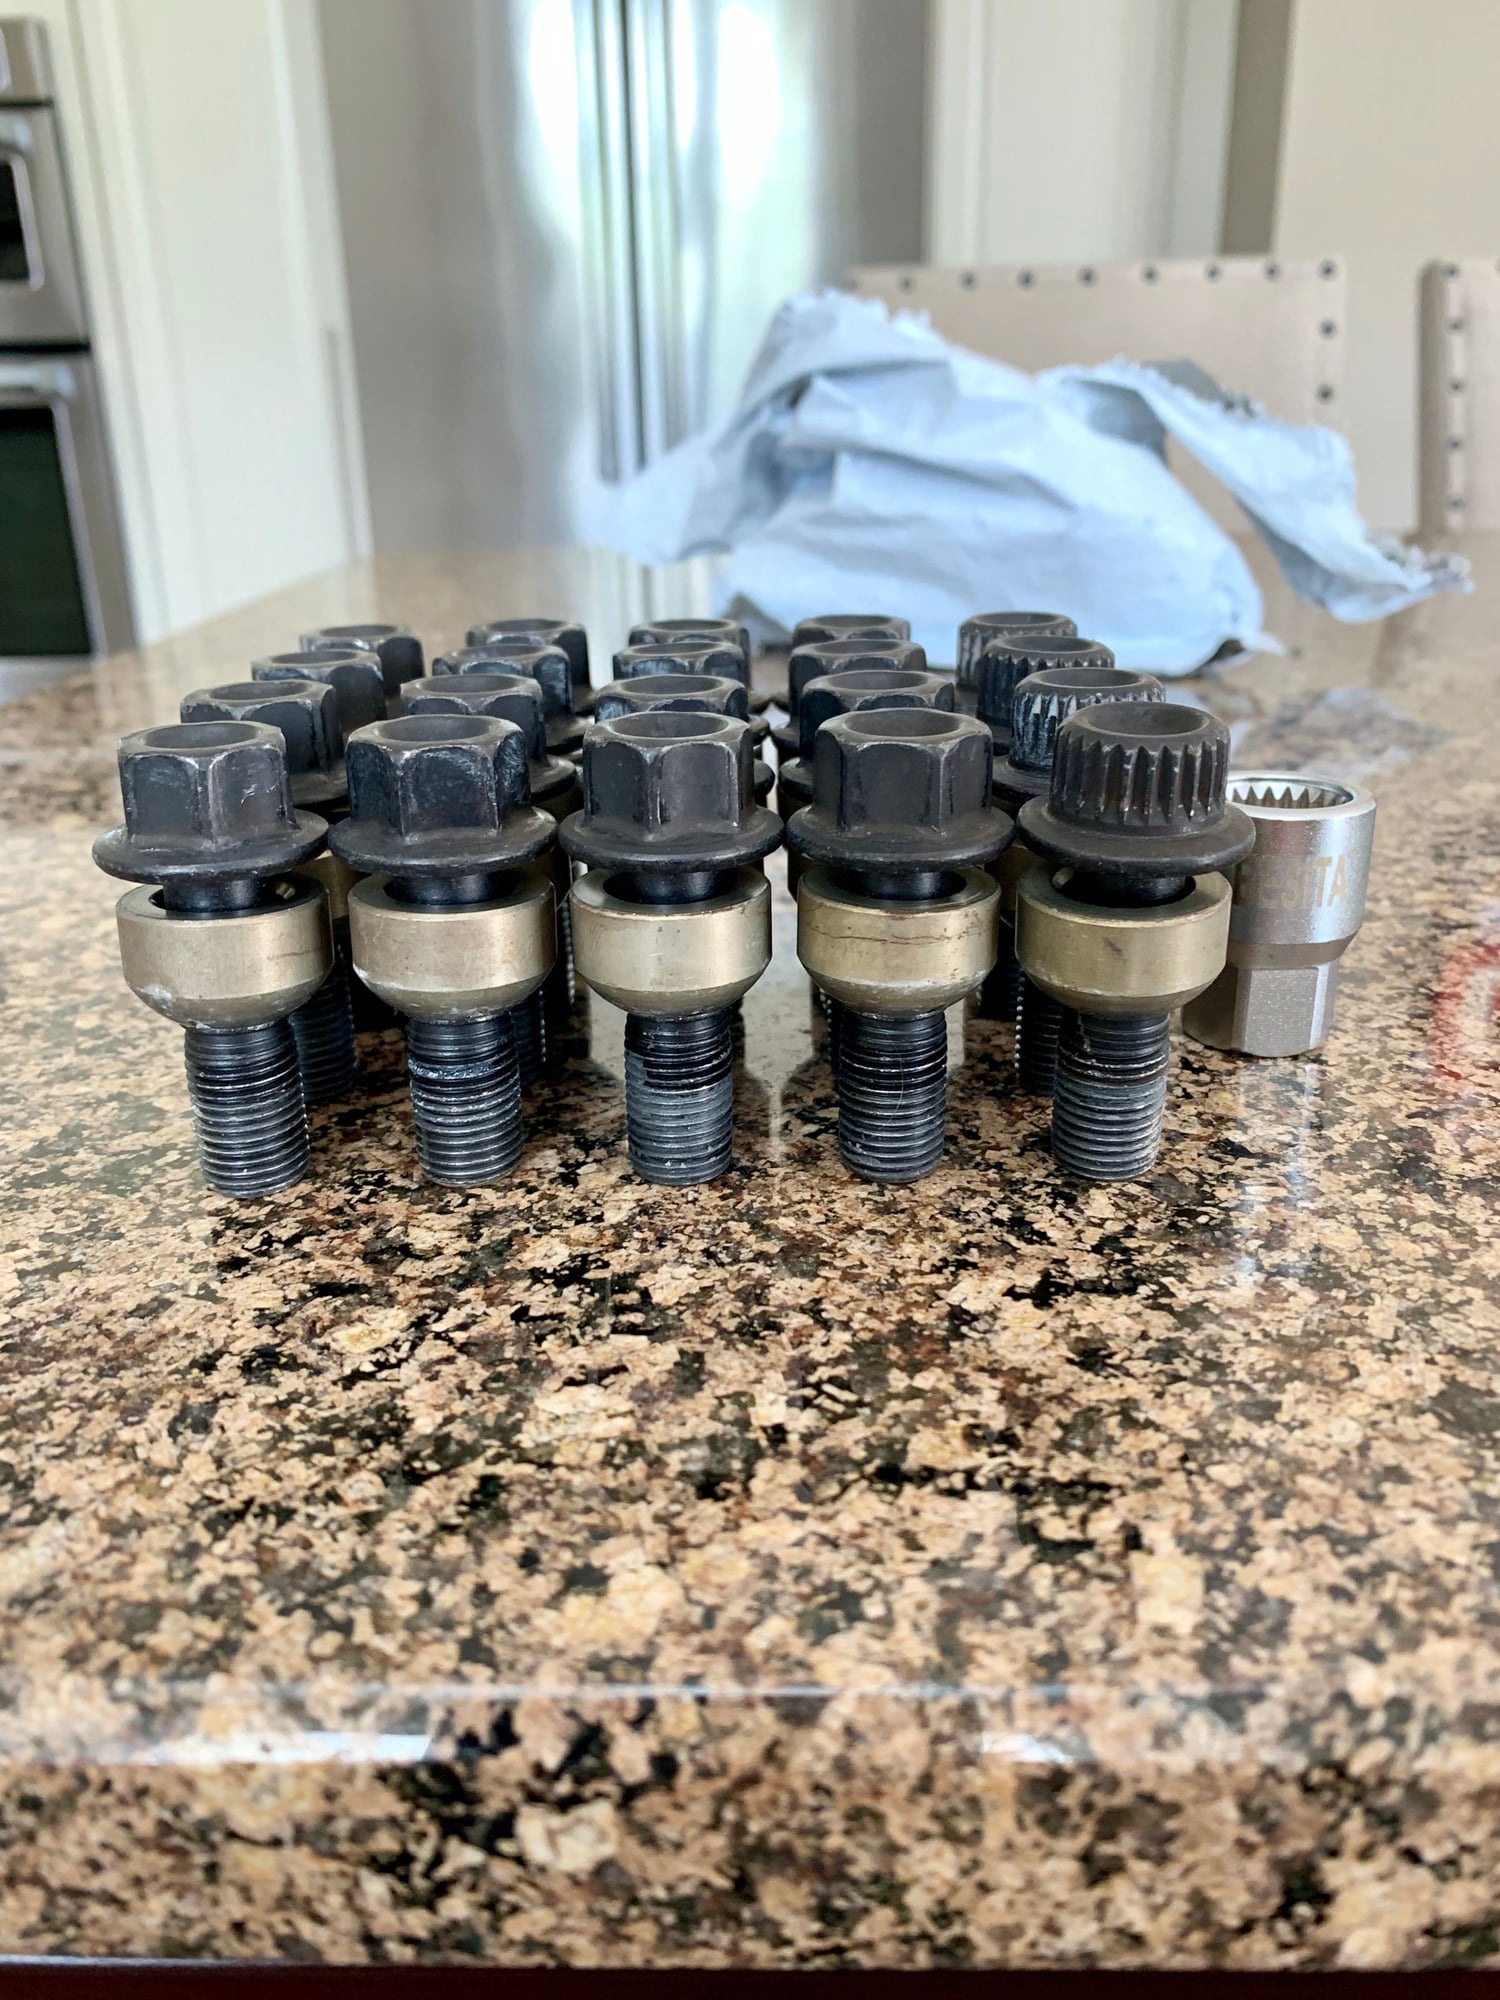 Wheels and Tires/Axles - FS: OEM black lug bolts (20) standard length, full set - Used - 1998 to 2019 Porsche All Models - Lansdale, PA 19446, United States